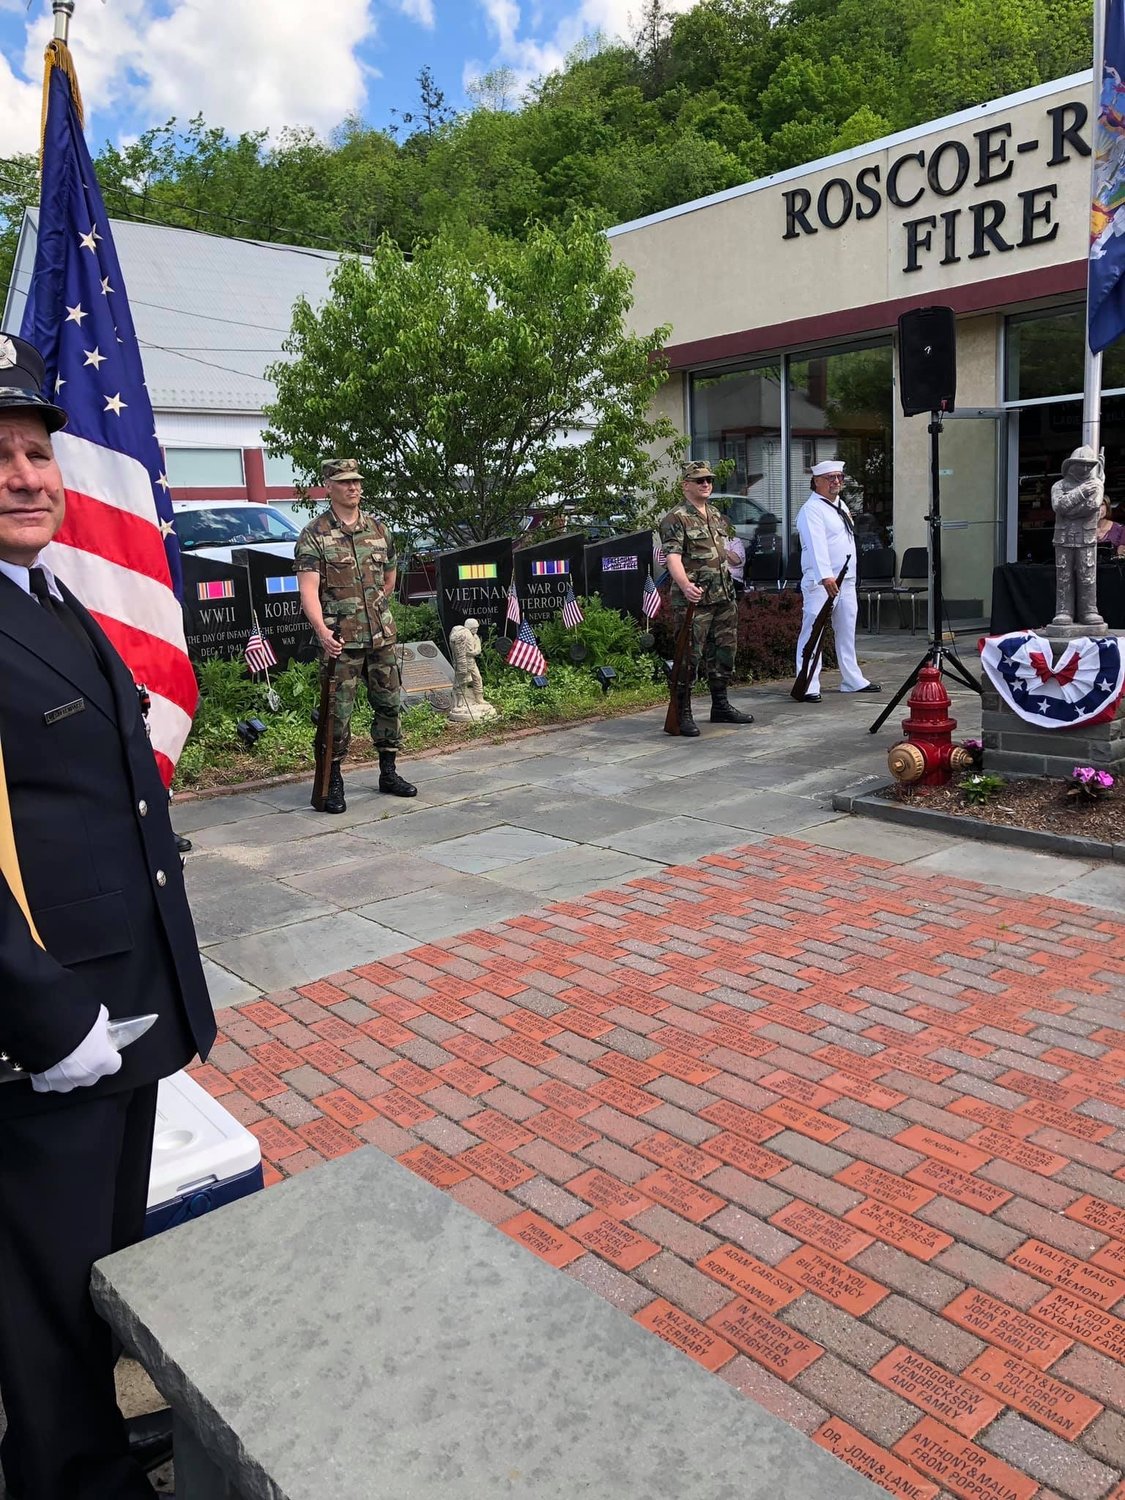 Though the Memorial Day observance won’t look as it did in 2019, Roscoe, NY doesn’t plan to let the day pass unmarked.